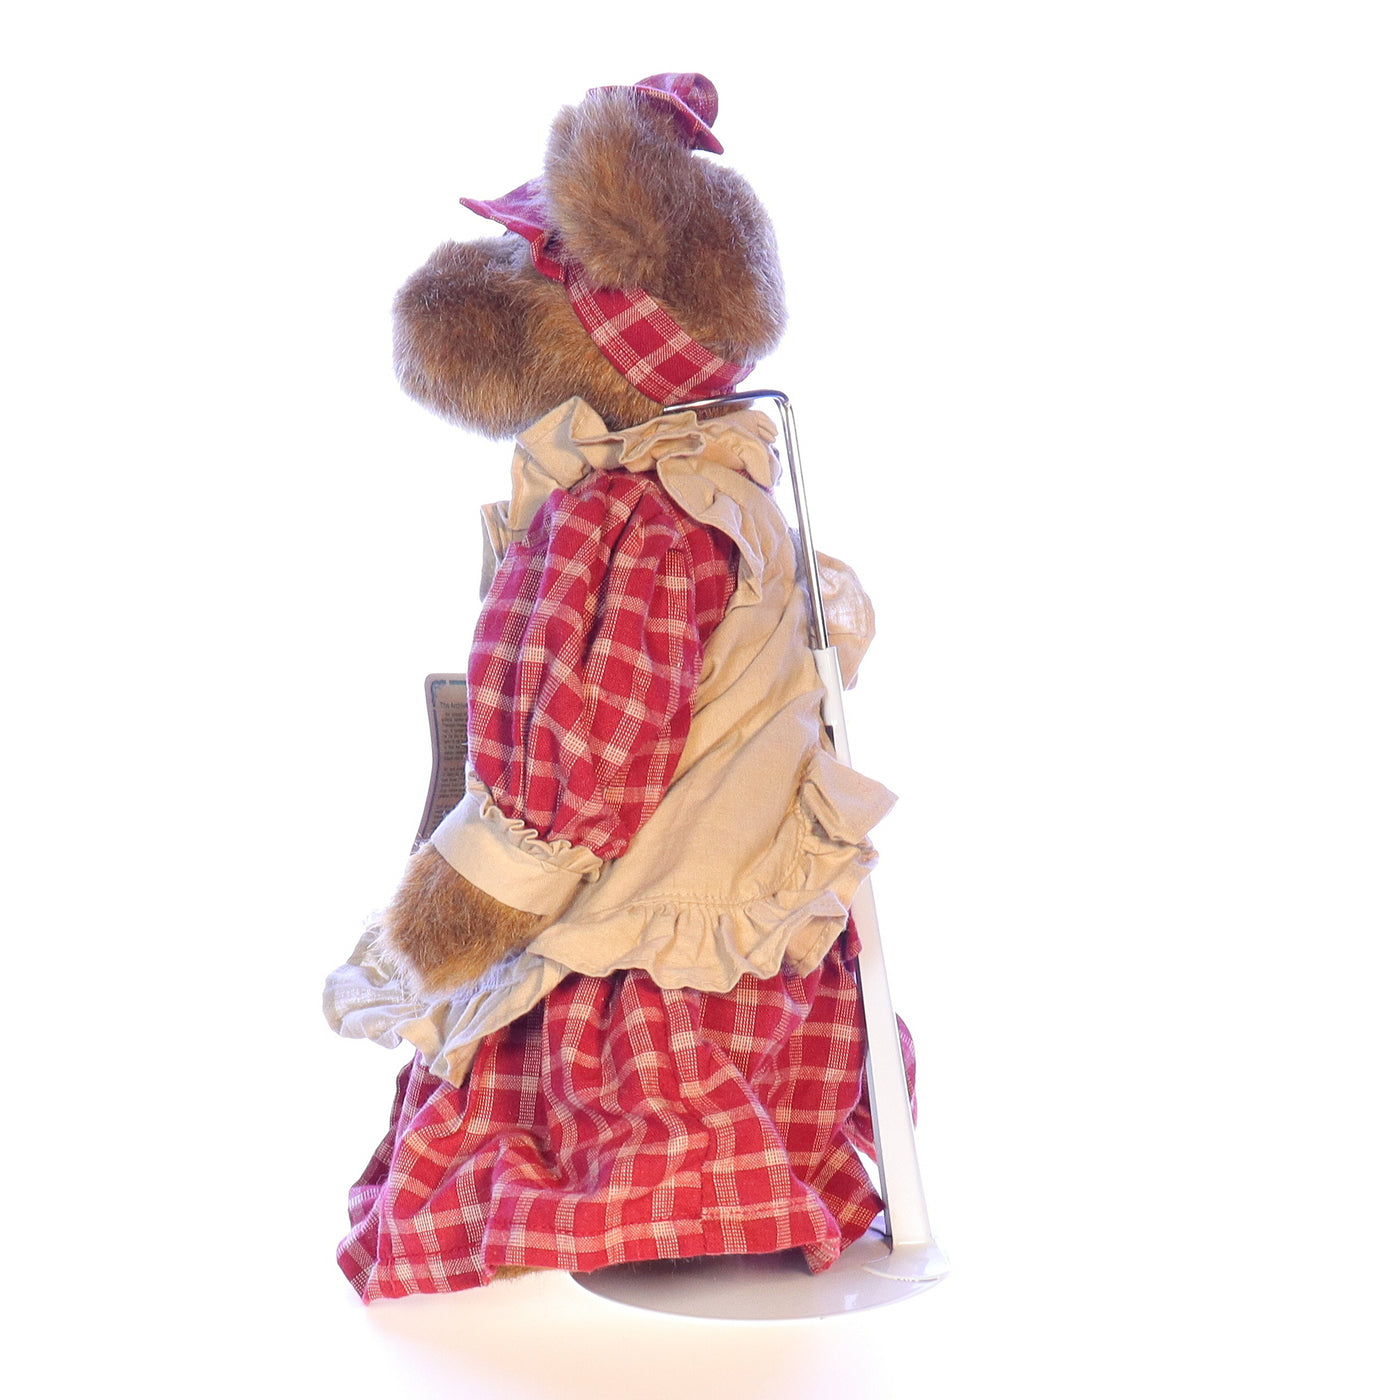 Boyds Bears Collection Plush with Tags The Archive Collection 912052 1990 12"